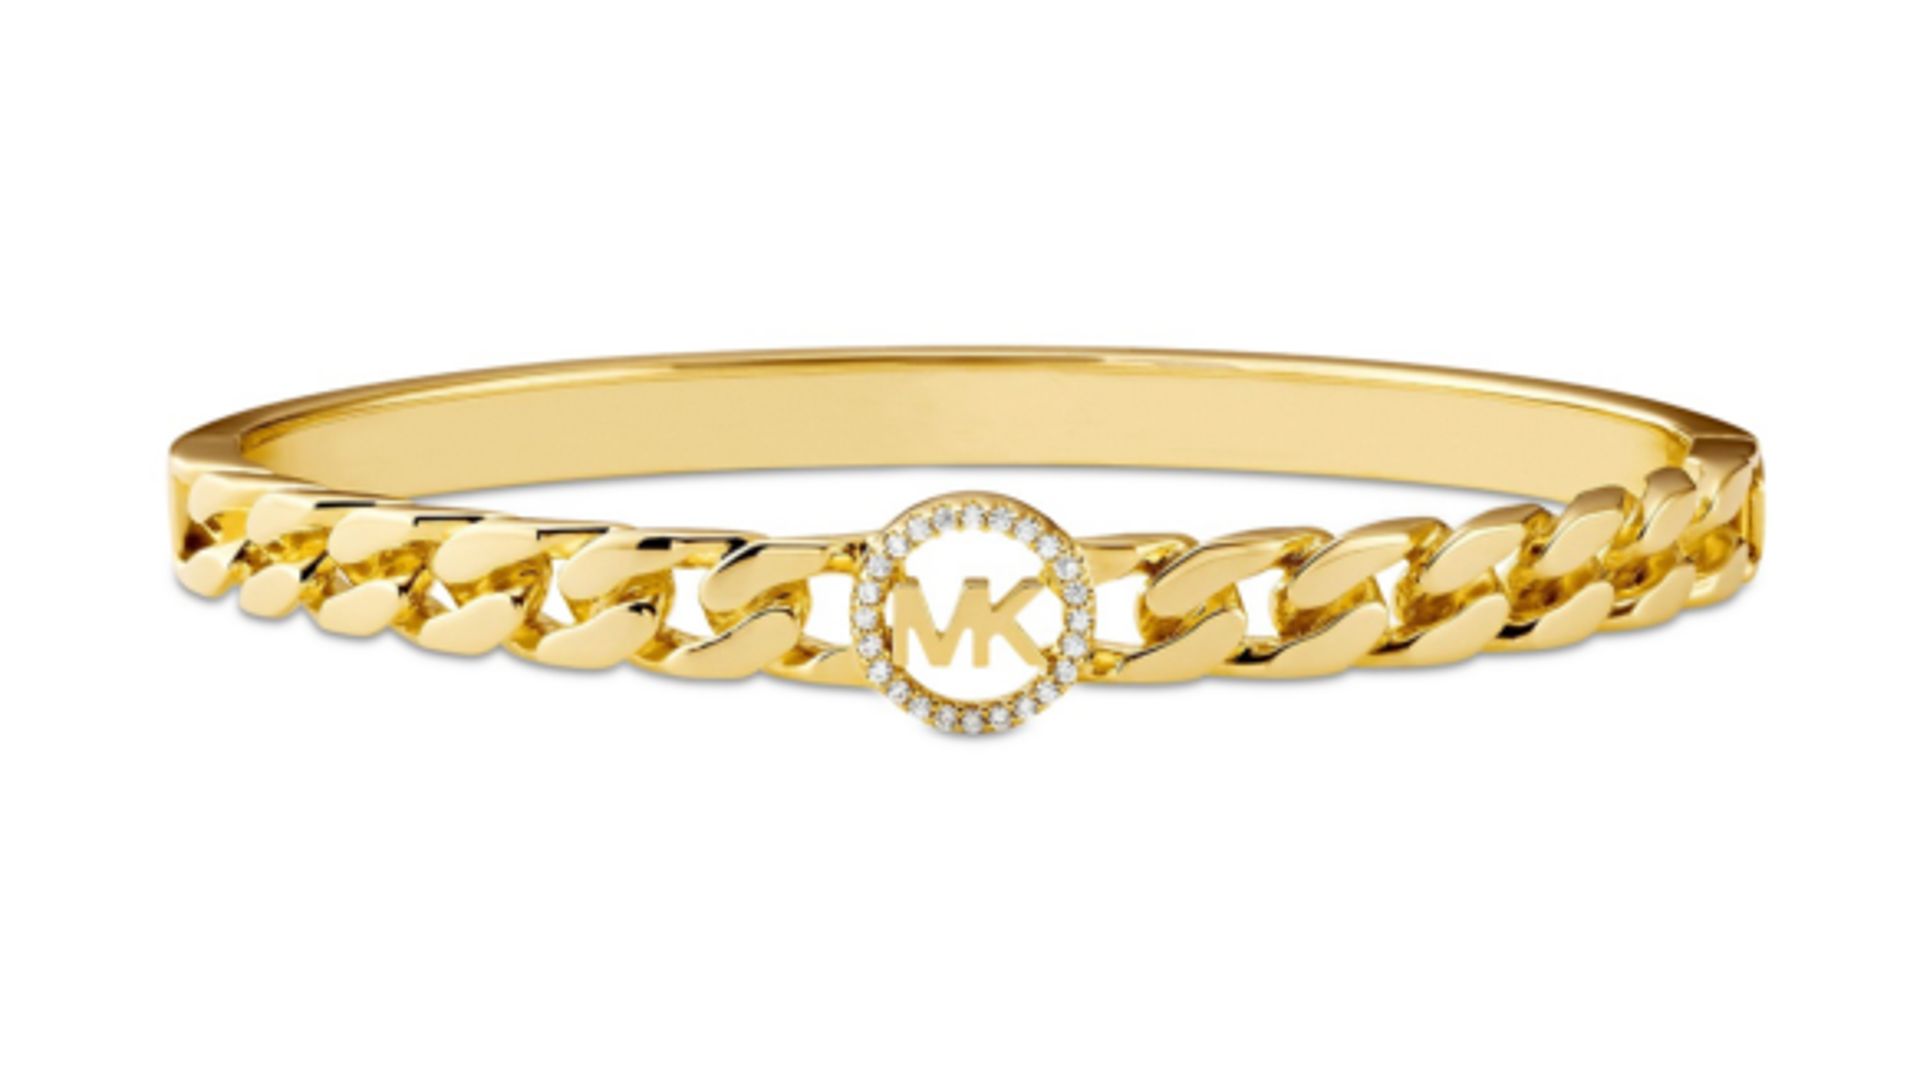 Michael Kors Gold-Tone Sterling Silver 